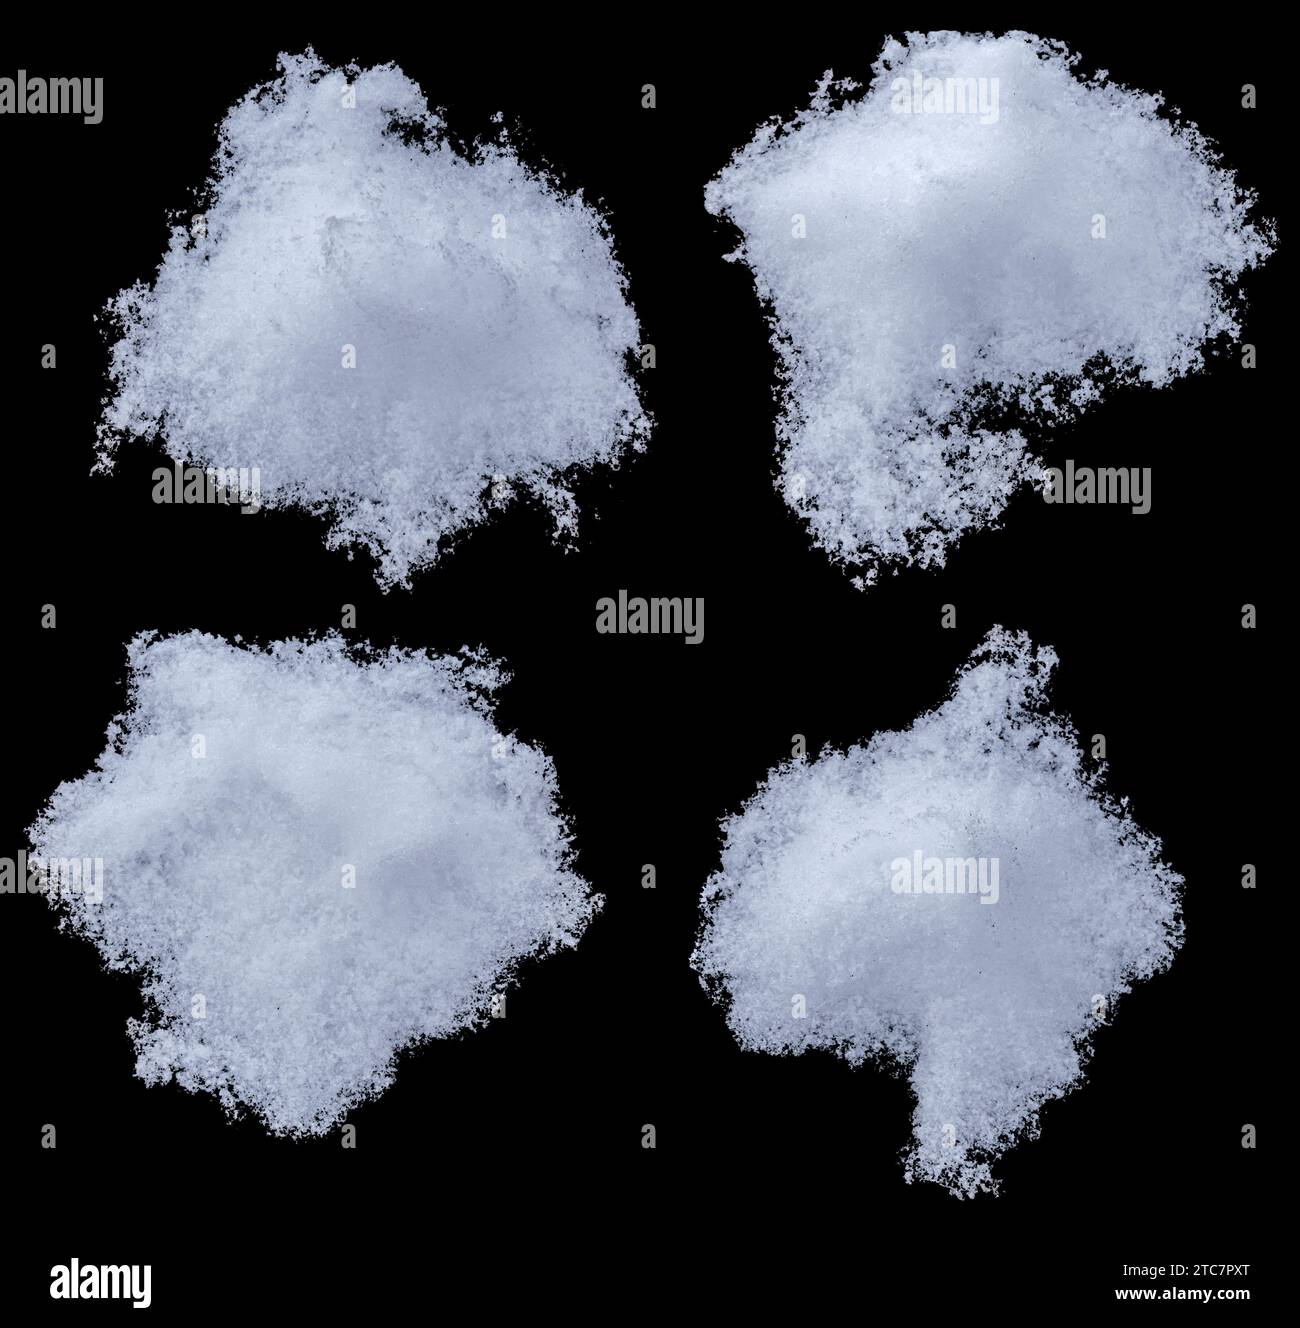 Set of snowball splats isolated on black. Winter snowy elements Stock Photo